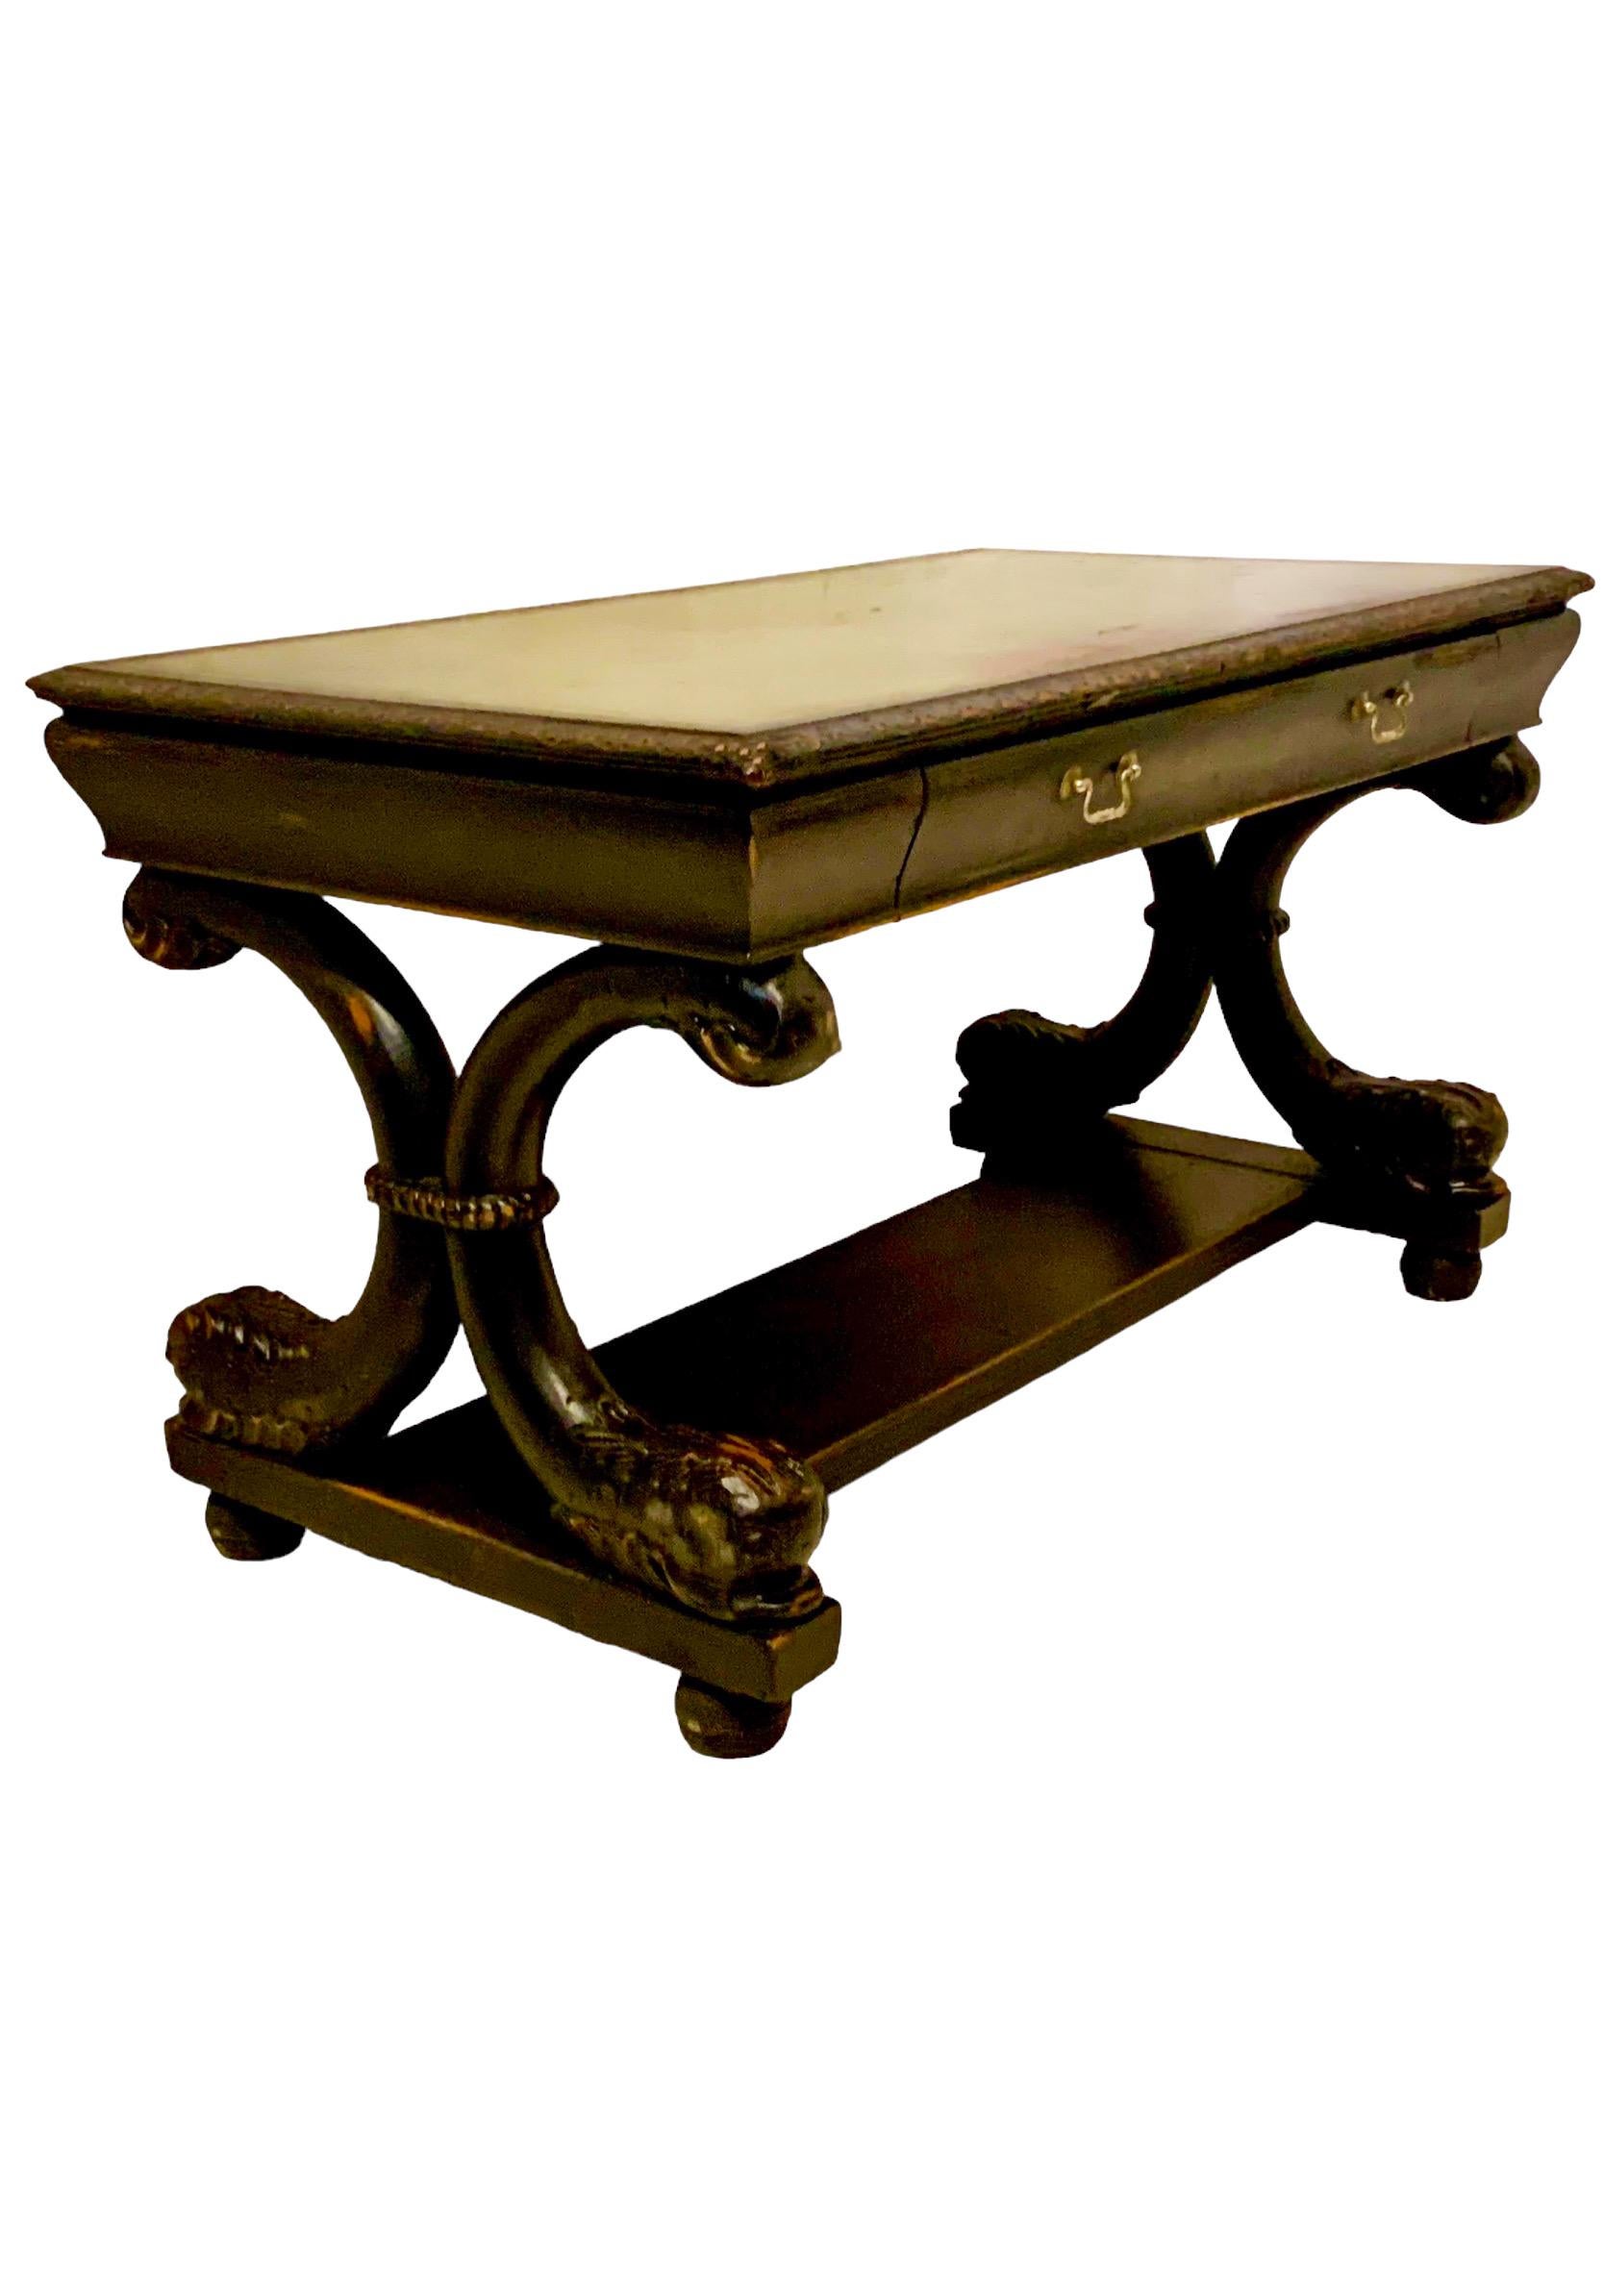 Neo-Classical R.J. Horner Style Desk / Table Green Leather Top & Dolphin Base For Sale 3